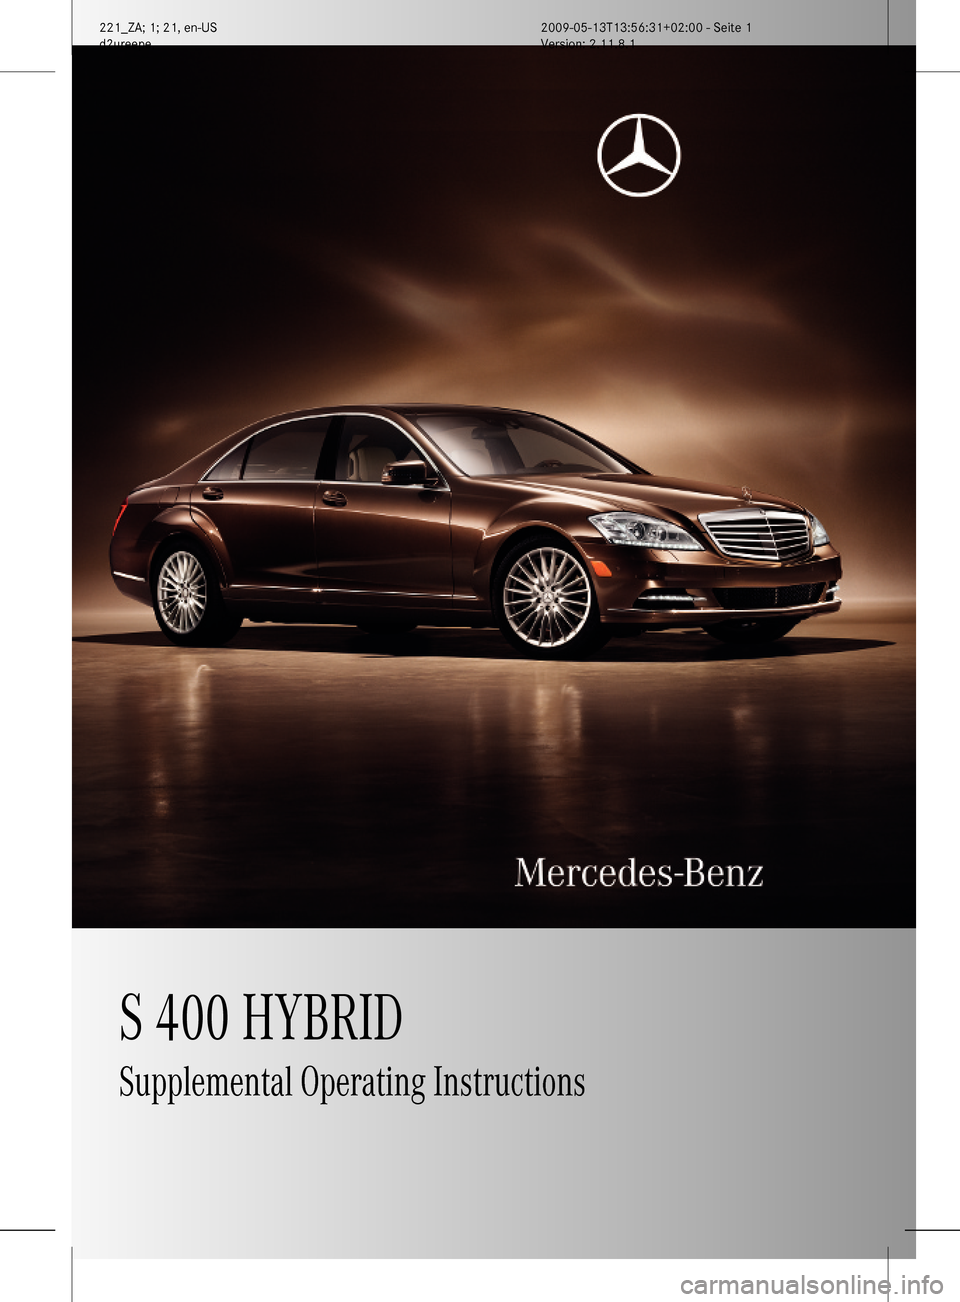 MERCEDES-BENZ S450 HYBRID 2010 W221 Owners Manual S 400 HYBRIDSupplemental Operating Instructions221_ZA; 1; 21, en-USd2ureepe,Version: 2.11.8.12009-05-13T13:56:31+02:00 - Seite 1    